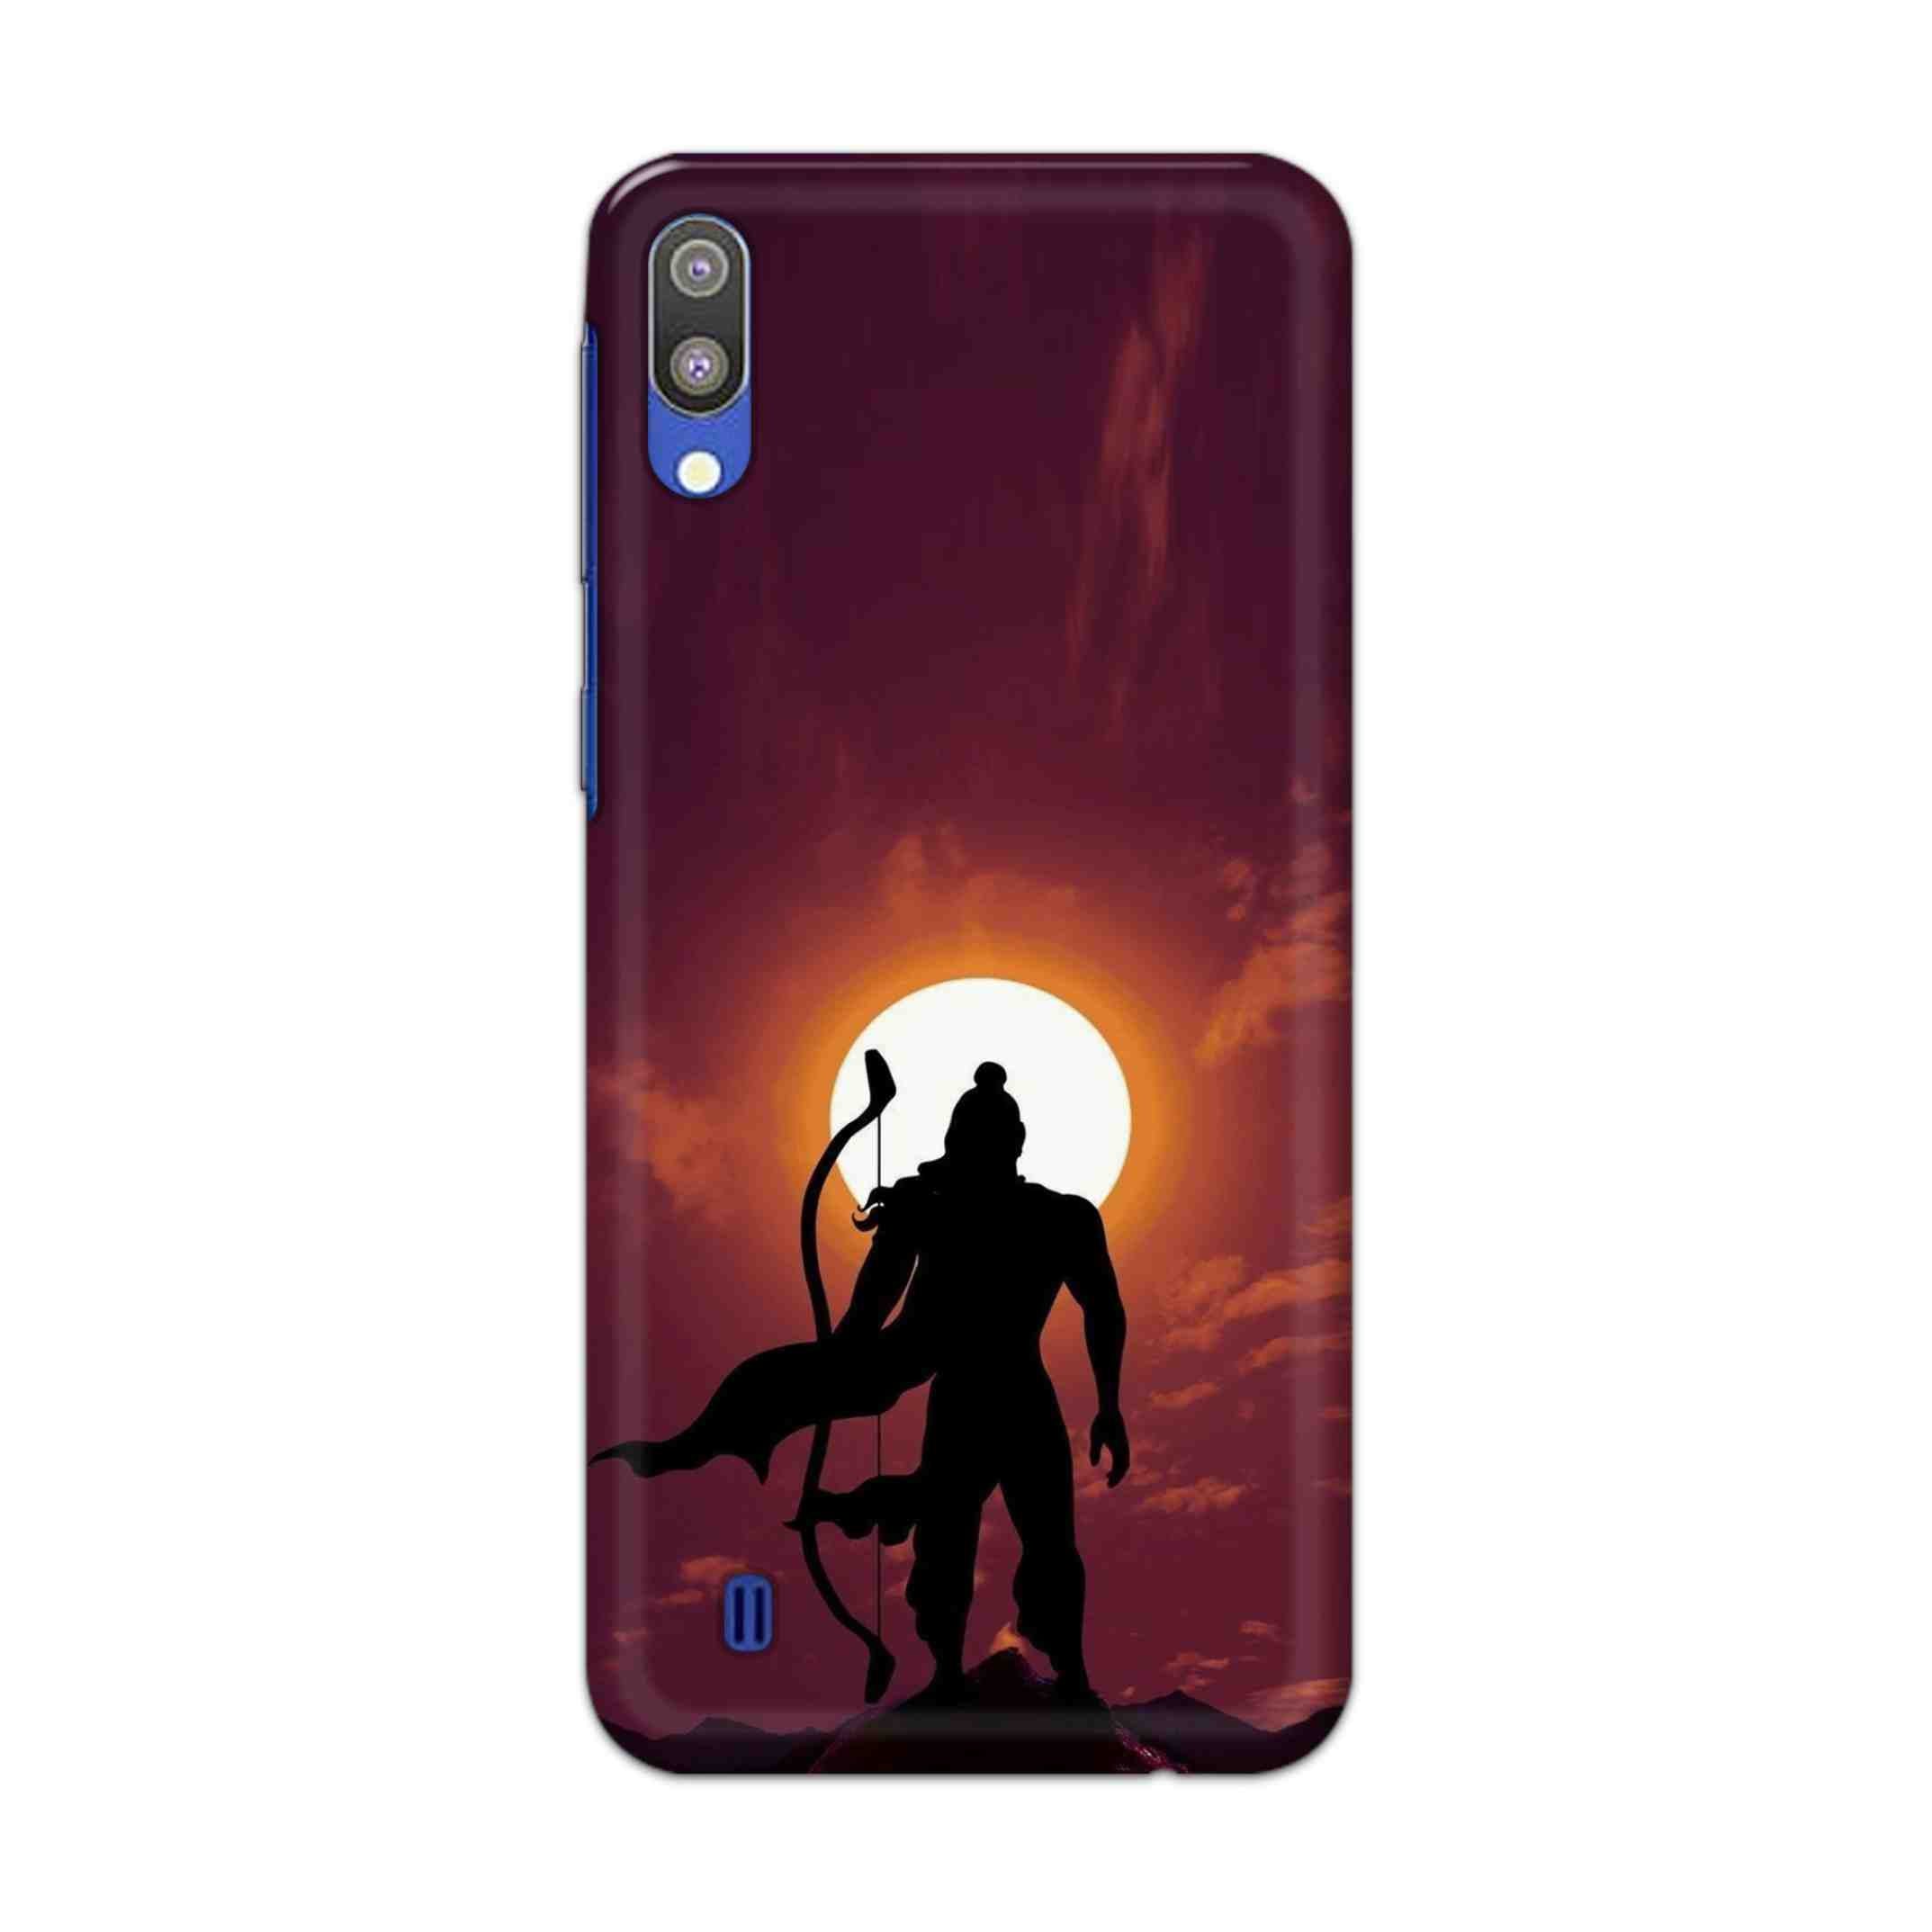 Buy Ram Hard Back Mobile Phone Case Cover For Samsung Galaxy M10 Online